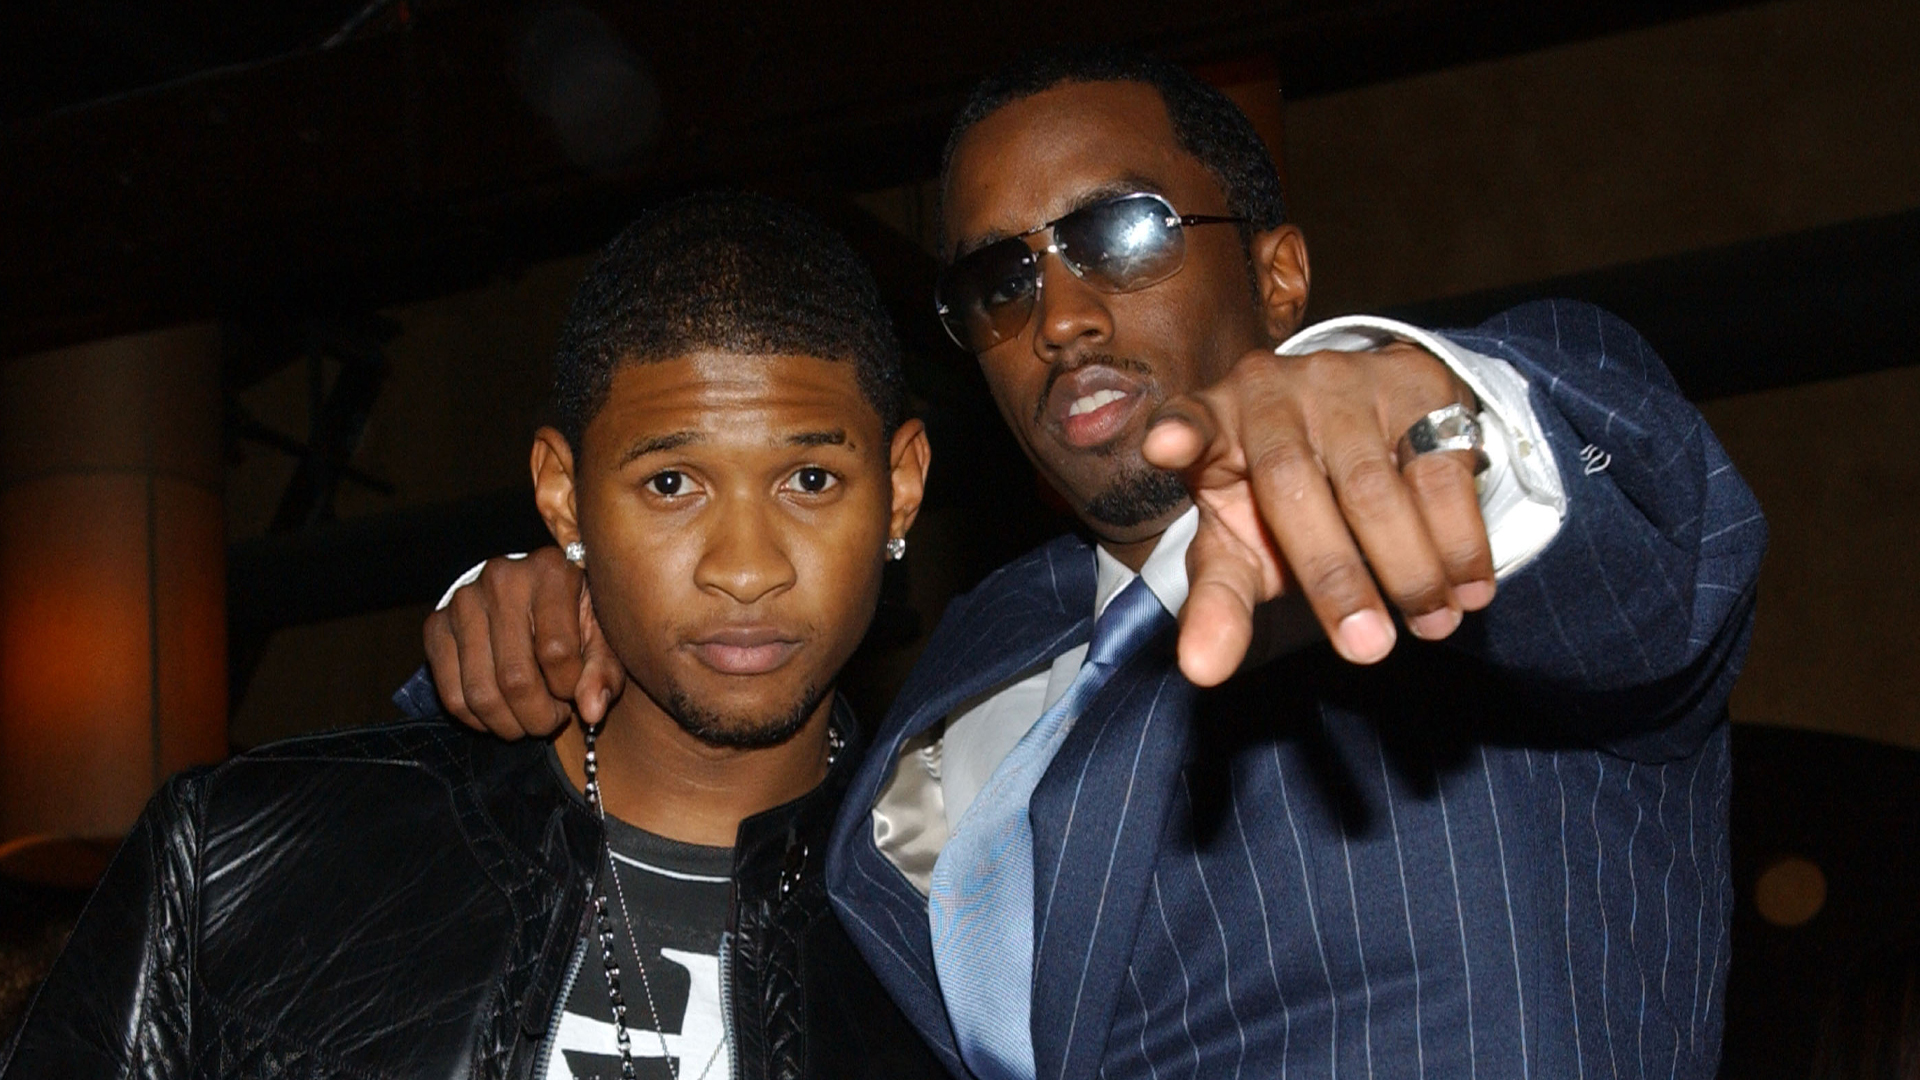 Usher recalls seeing ‘very curious things’ at Diddy’s house when he was 14 after feds raid rapper’s property